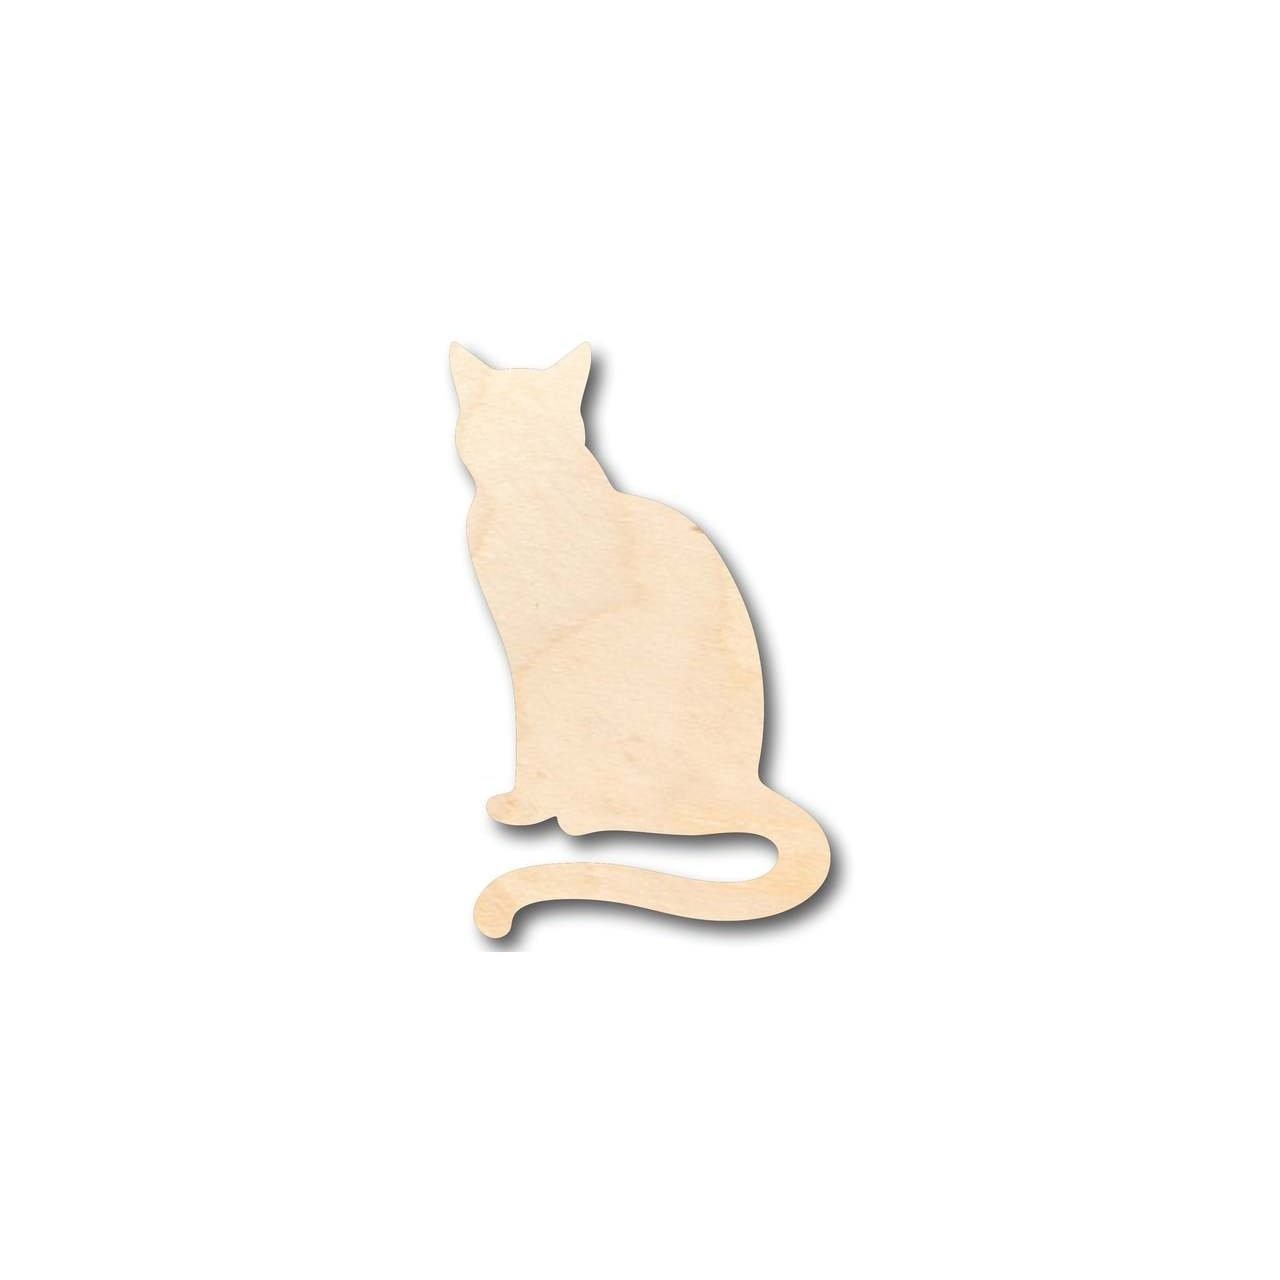 Unfinished Wooden Sitting Cat Shape - Animal - Pet - Craft - up to 24